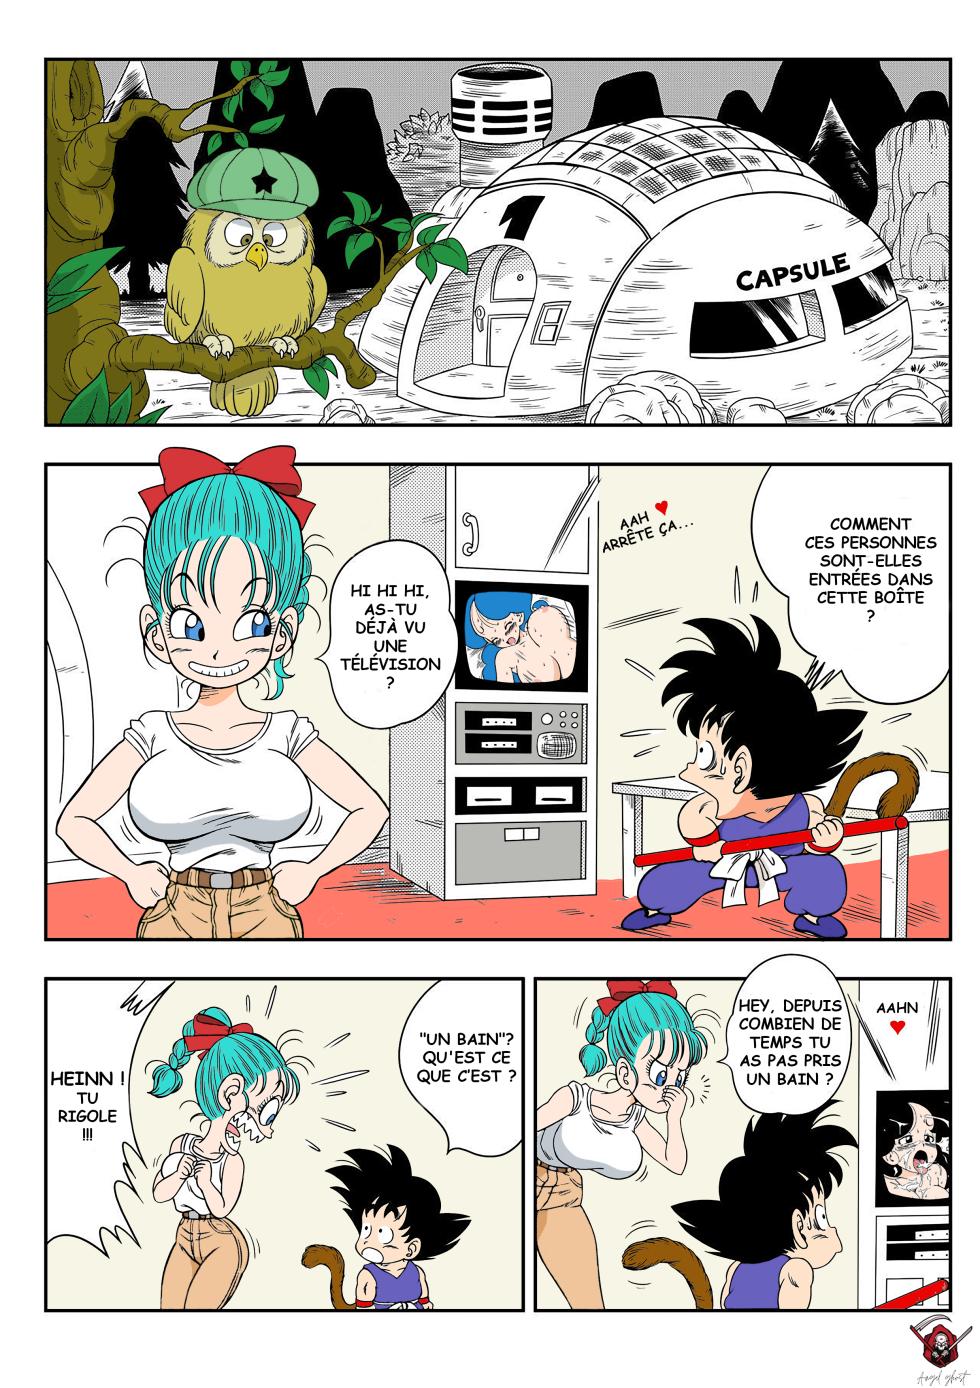 Sexe dans le bain (WIP) (Dragon Ball) [French] [angel_ghost] [Colorized] [Decensored] - Page 1